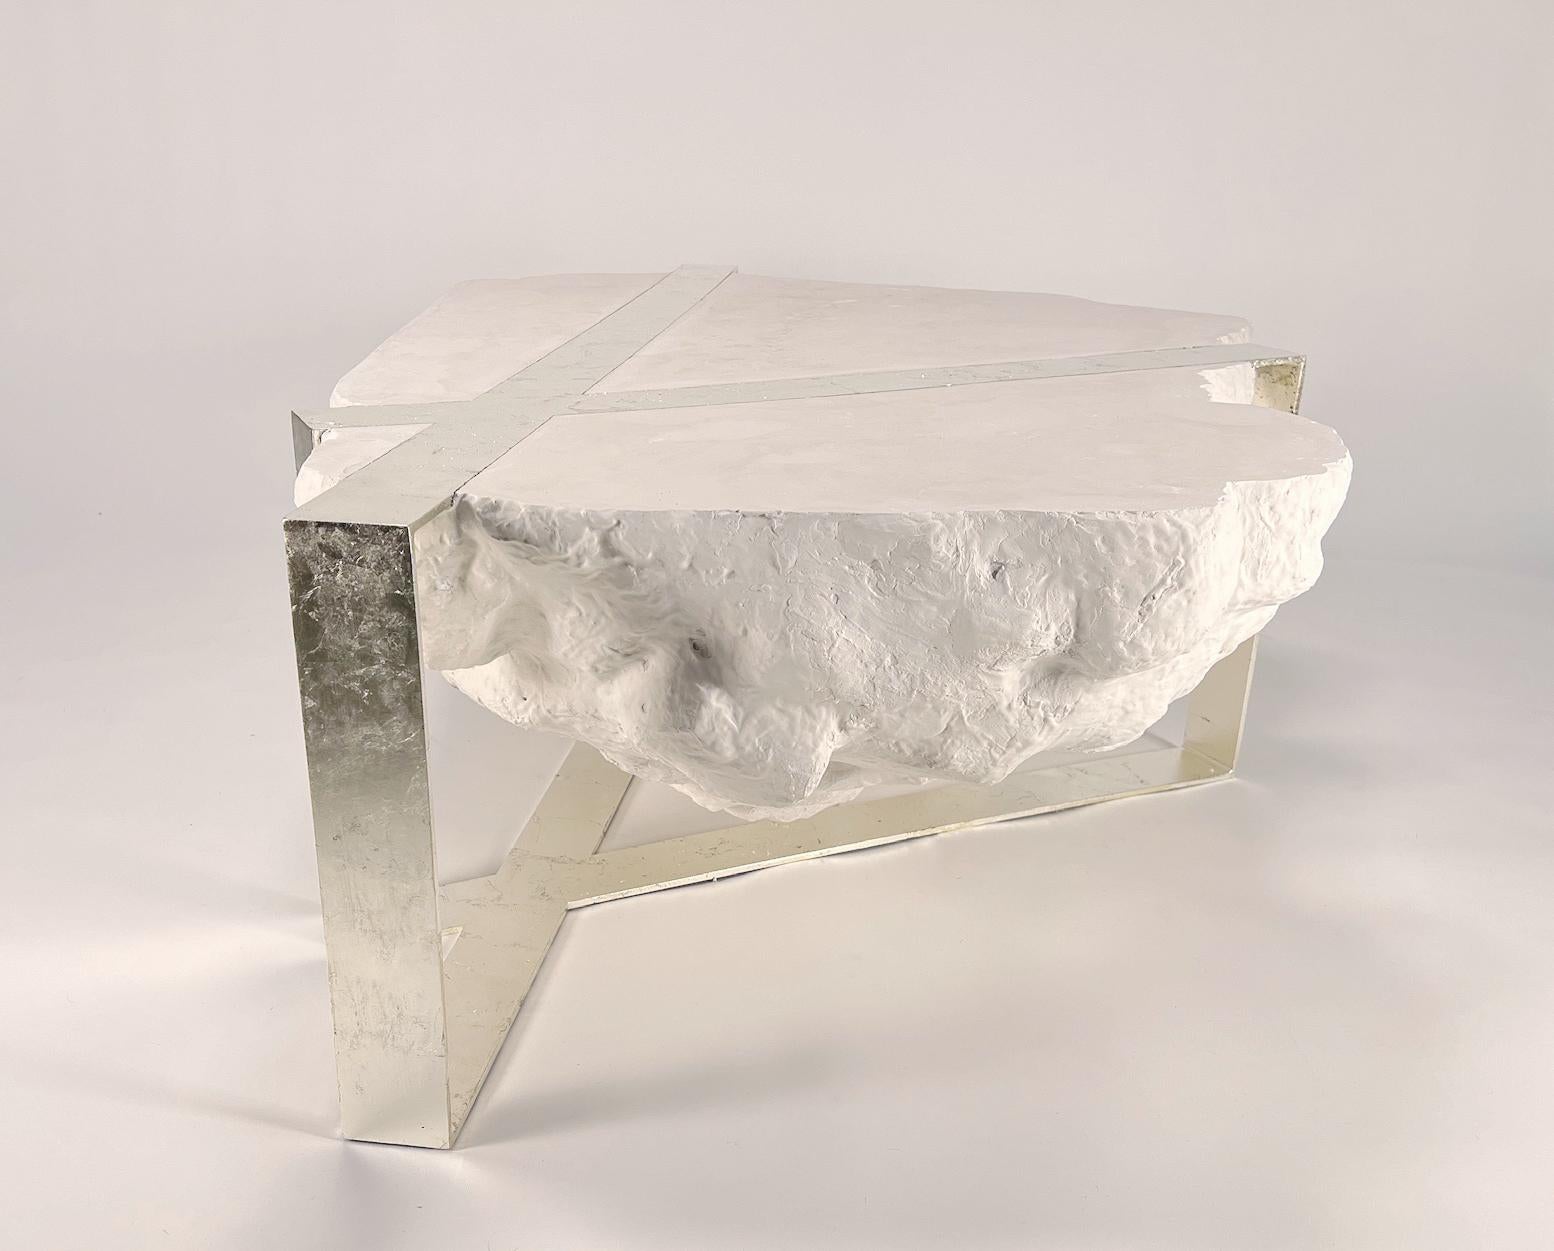 Gold Leaf Ohlin Coffee Table - Contemporary One-Of-A-Kind Table by Artist Gabriel Anderson